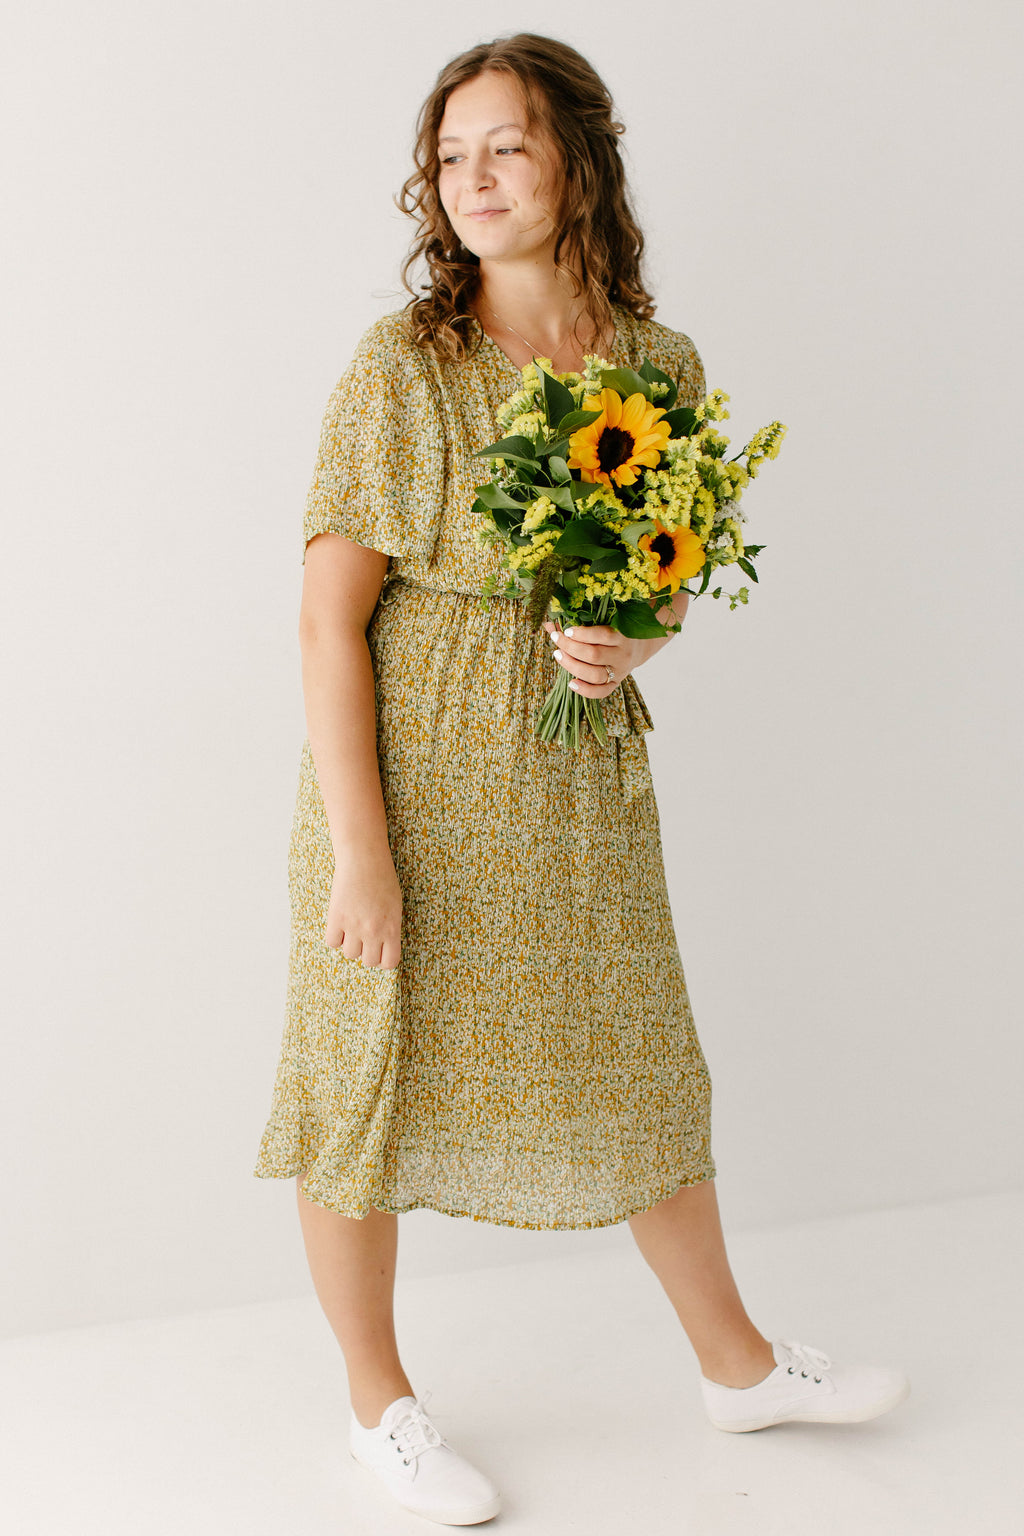 'Meredith' Floral Pleated Midi Dress in Dandelion